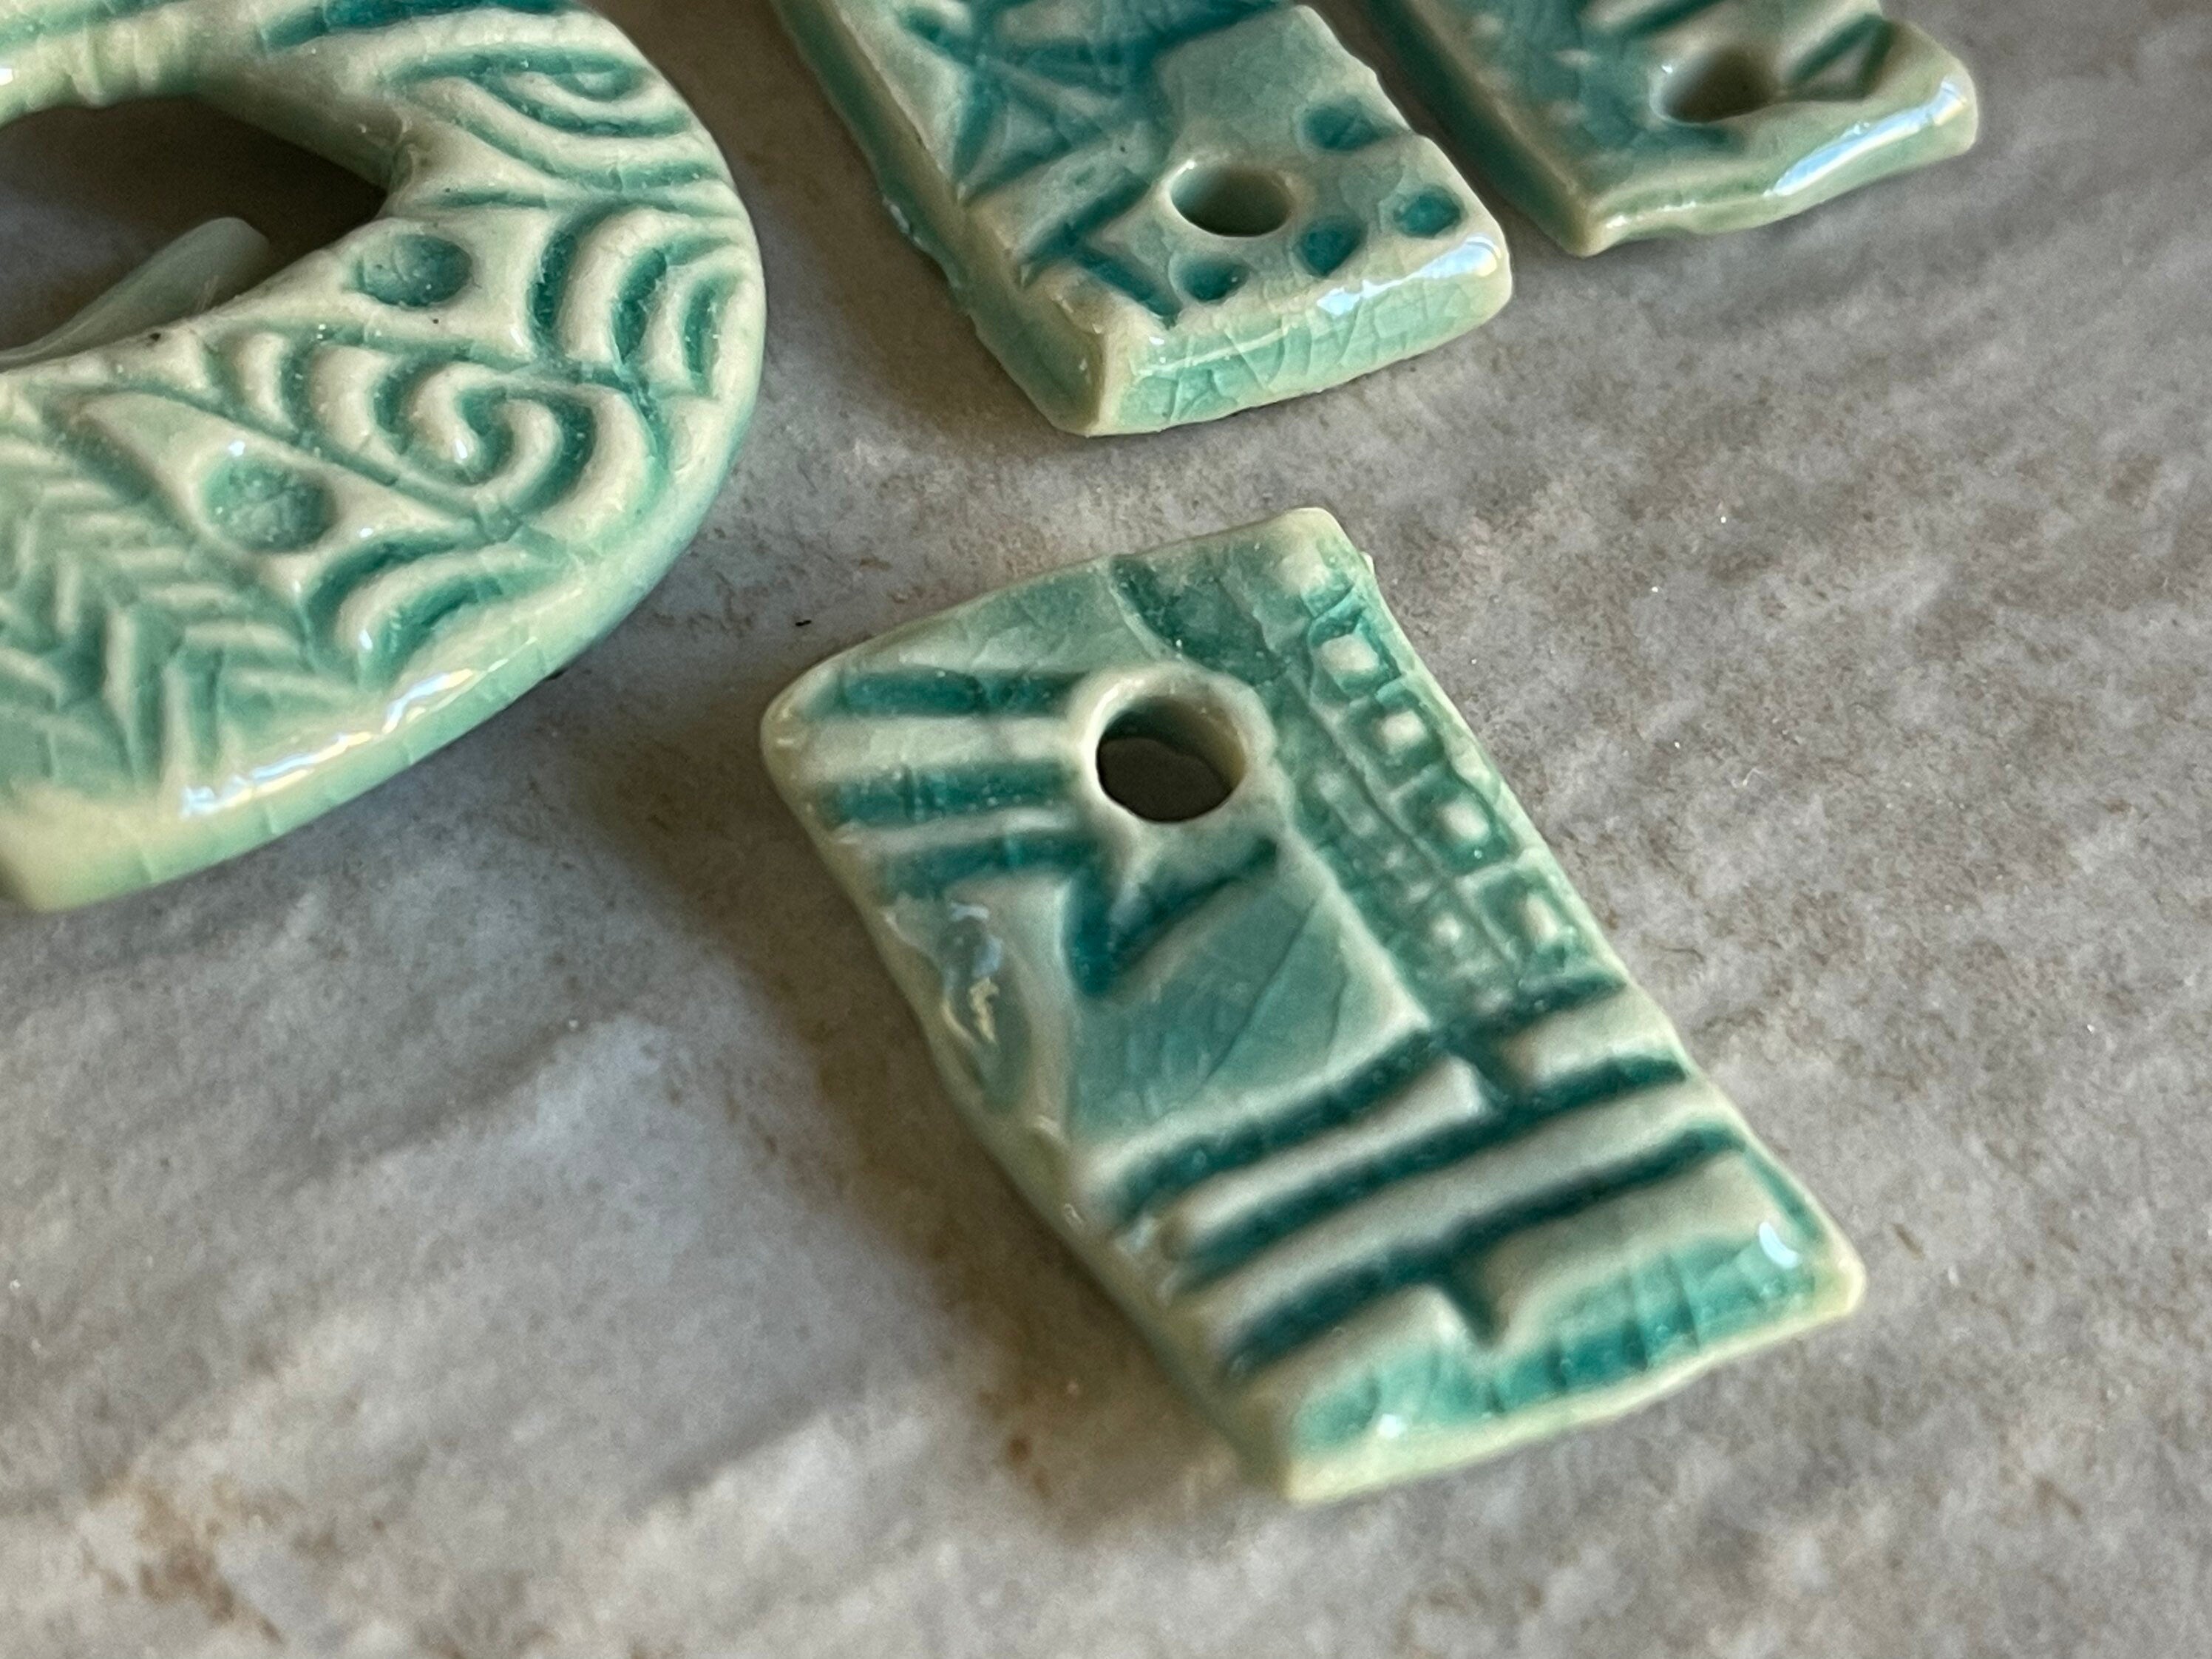 SALE Turquoise Pendant Bead and Charms, Jewelry Making Components, Beading Handmade